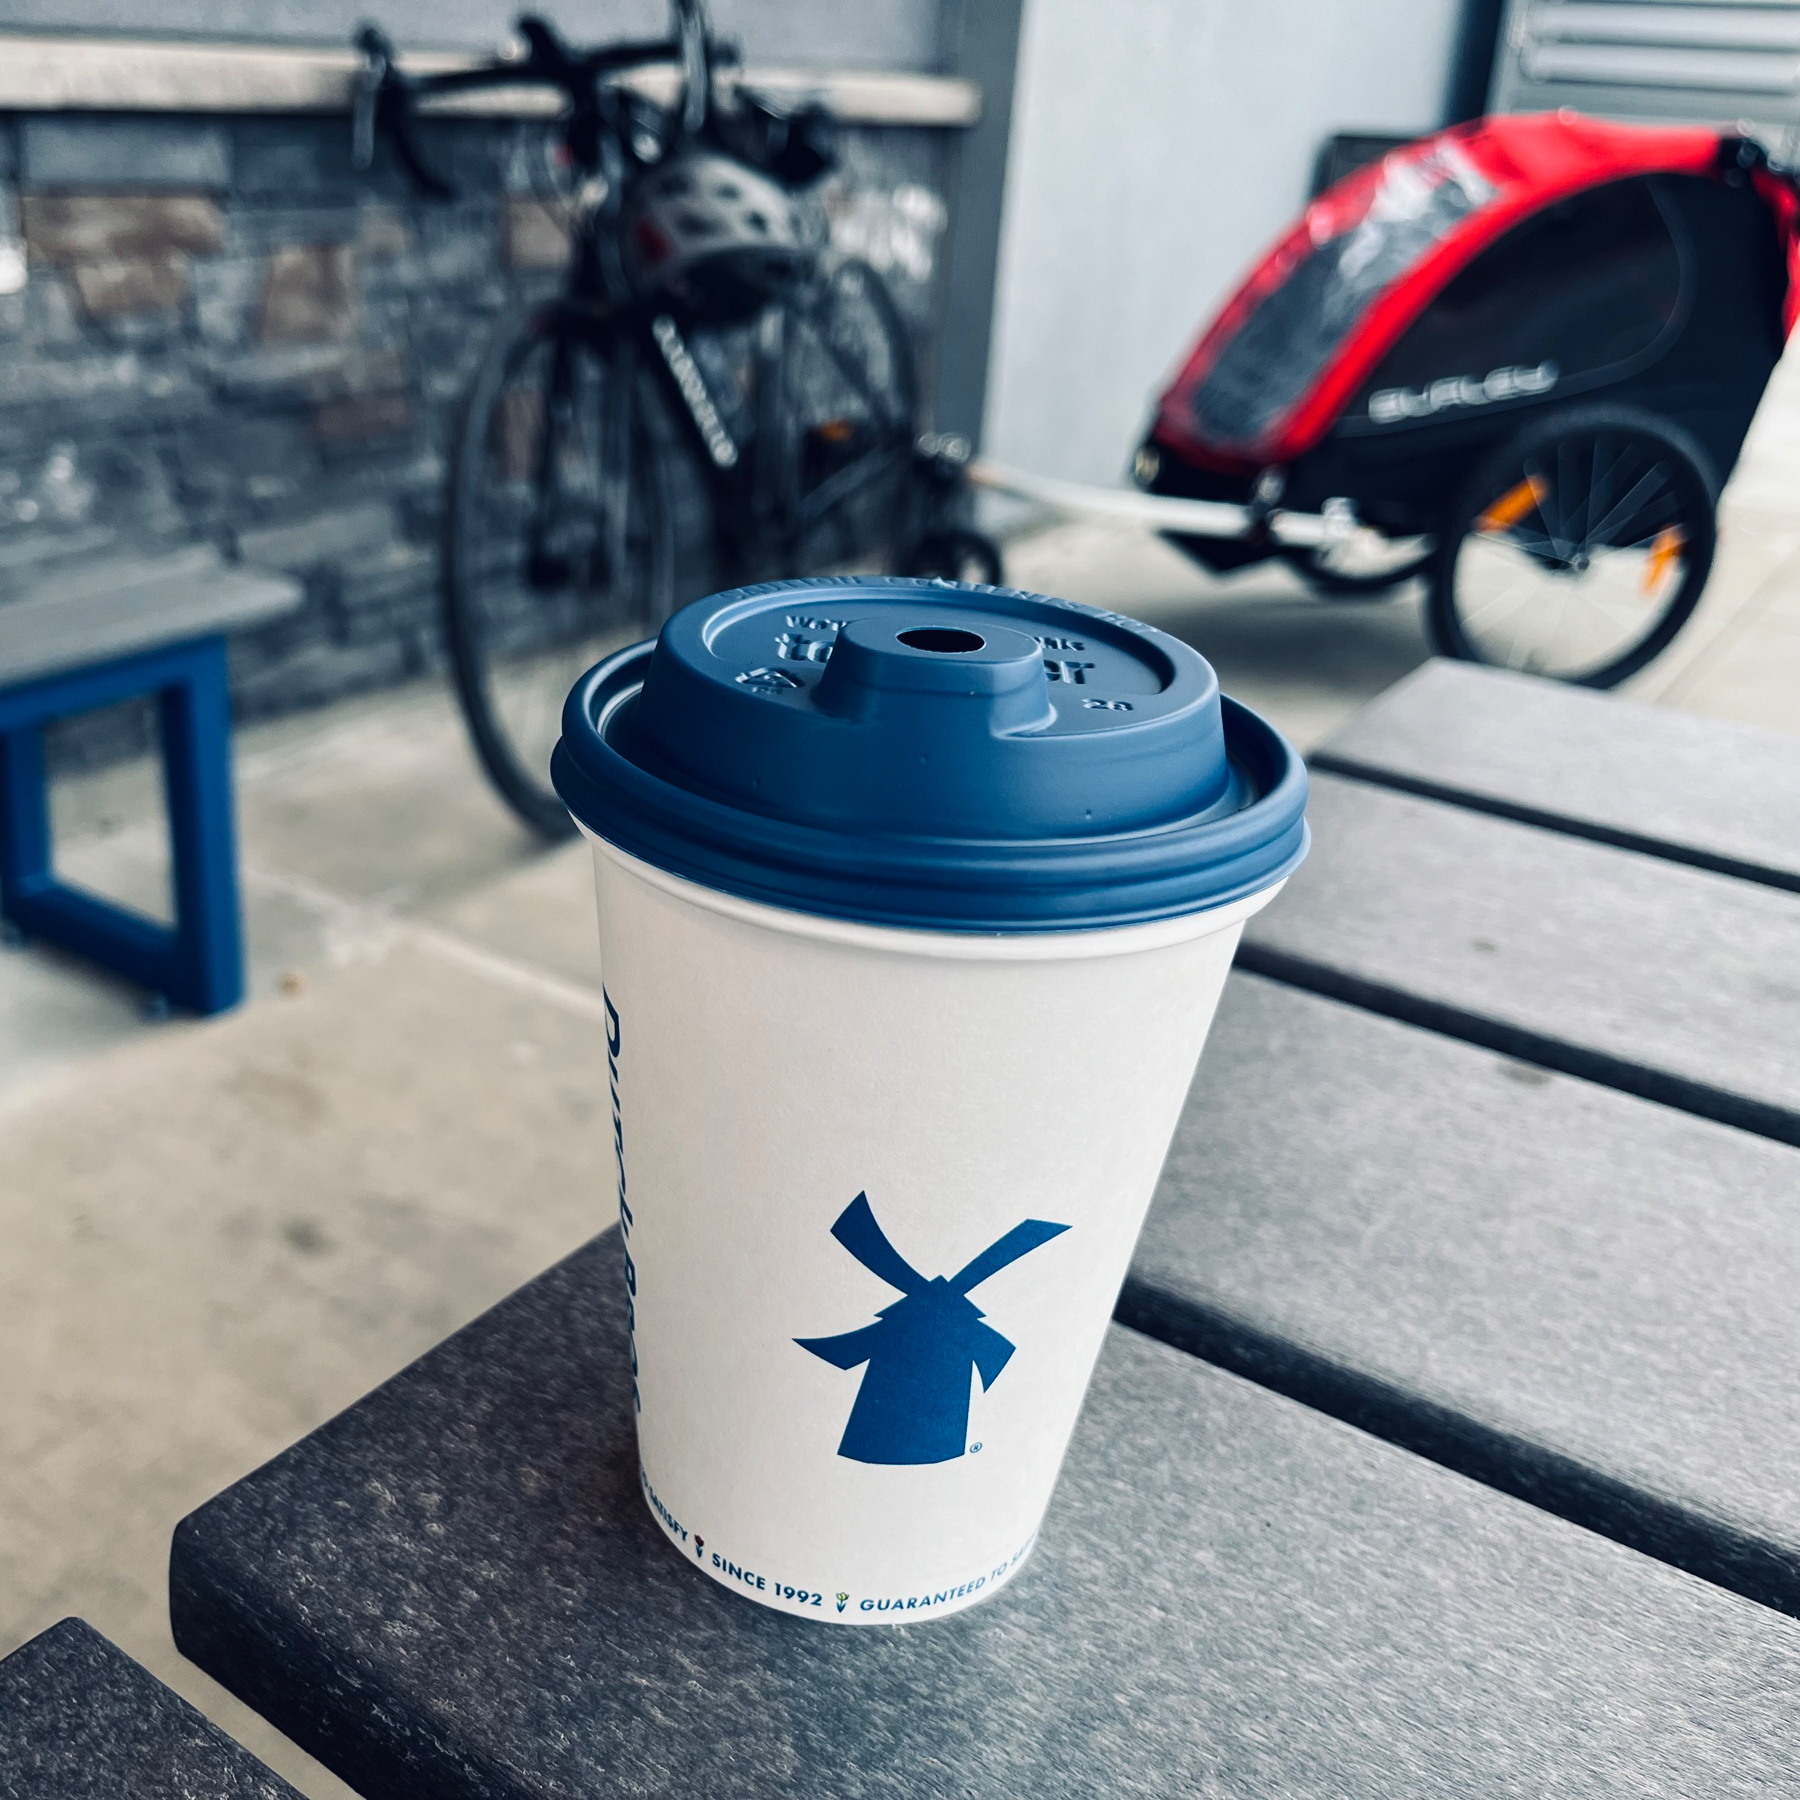 A disposable coffee cup with a blue lid and a windmill logo on the side rests on an outdoor table, with a blurred background featuring a bench, a bicycle, and a bike trailer.